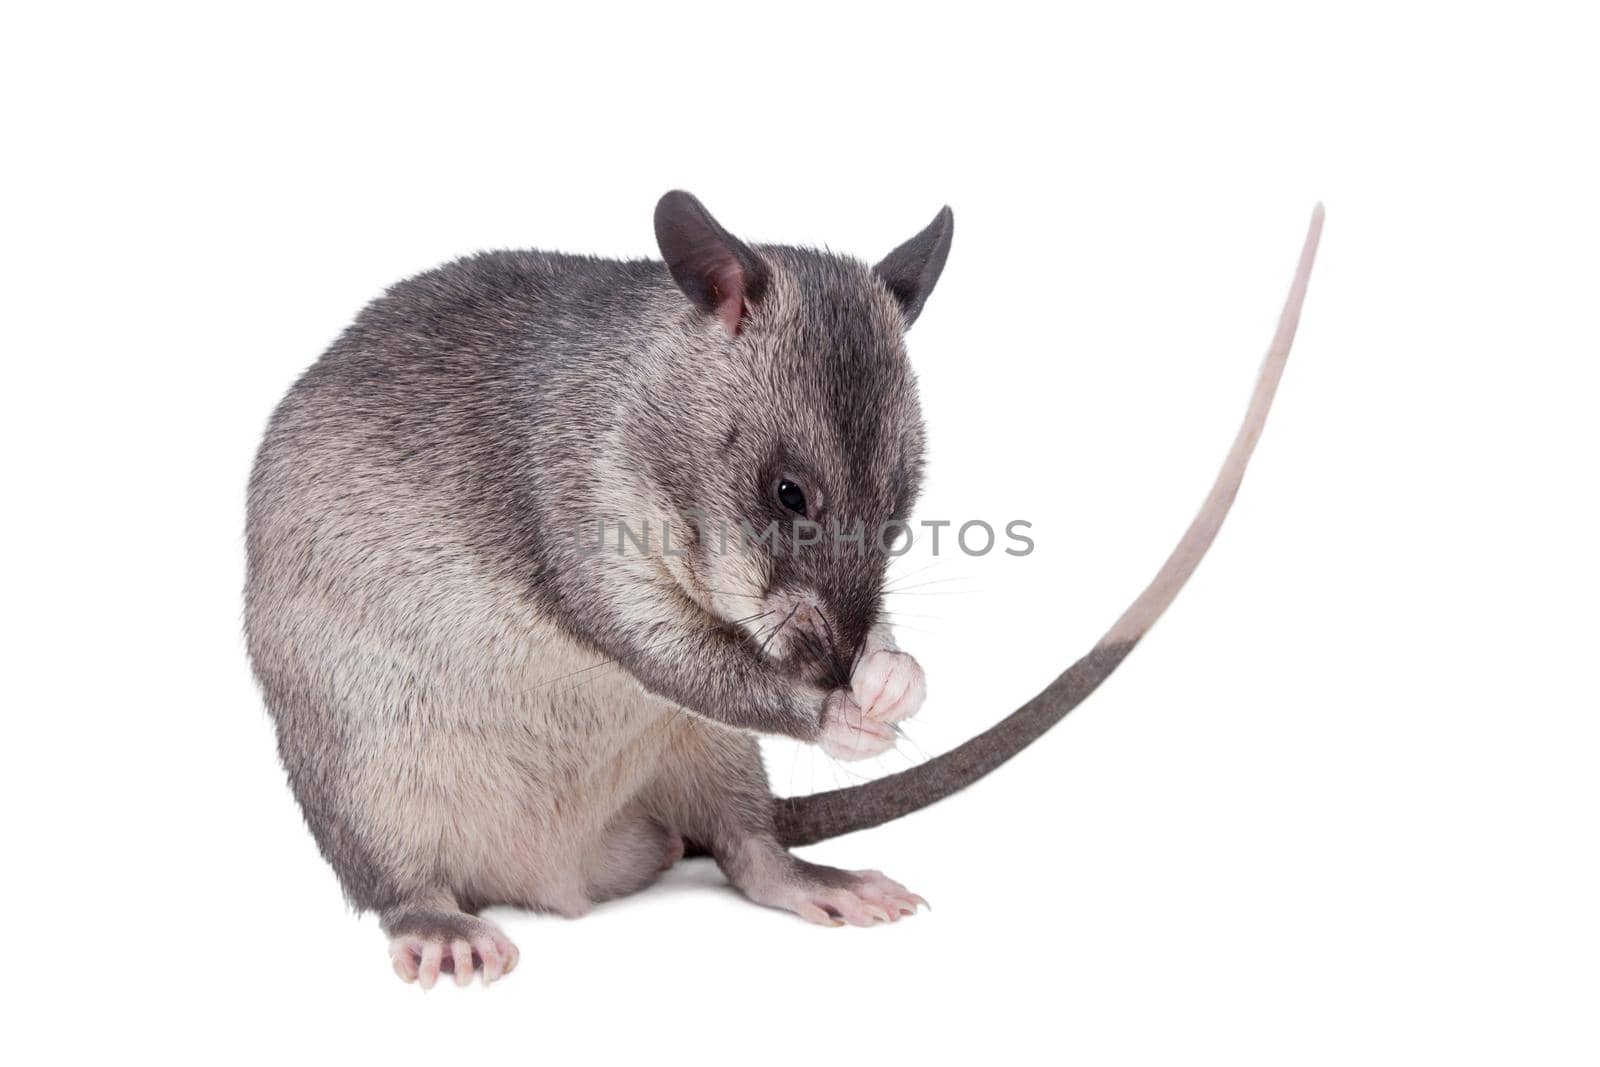 Gambian pouched rat cub, Cricetomys gambianus, isolated on white background